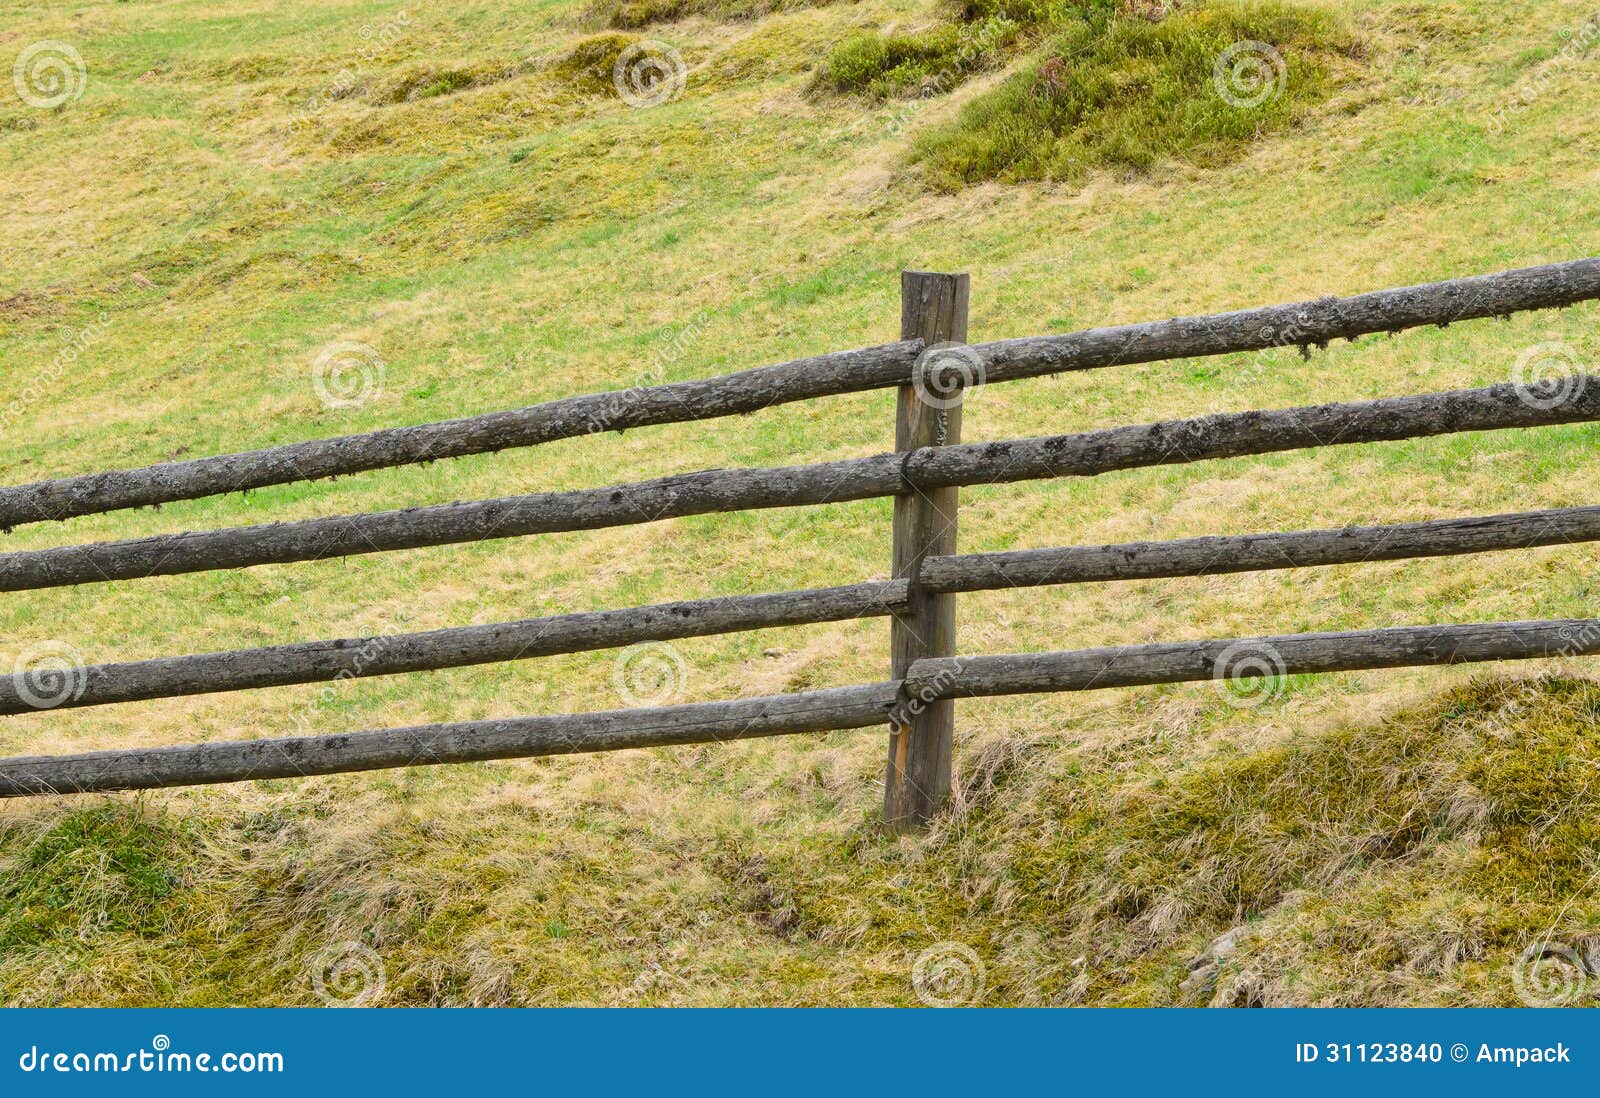 Rustic wooden fence composed of four parallel poles at the foot of a 